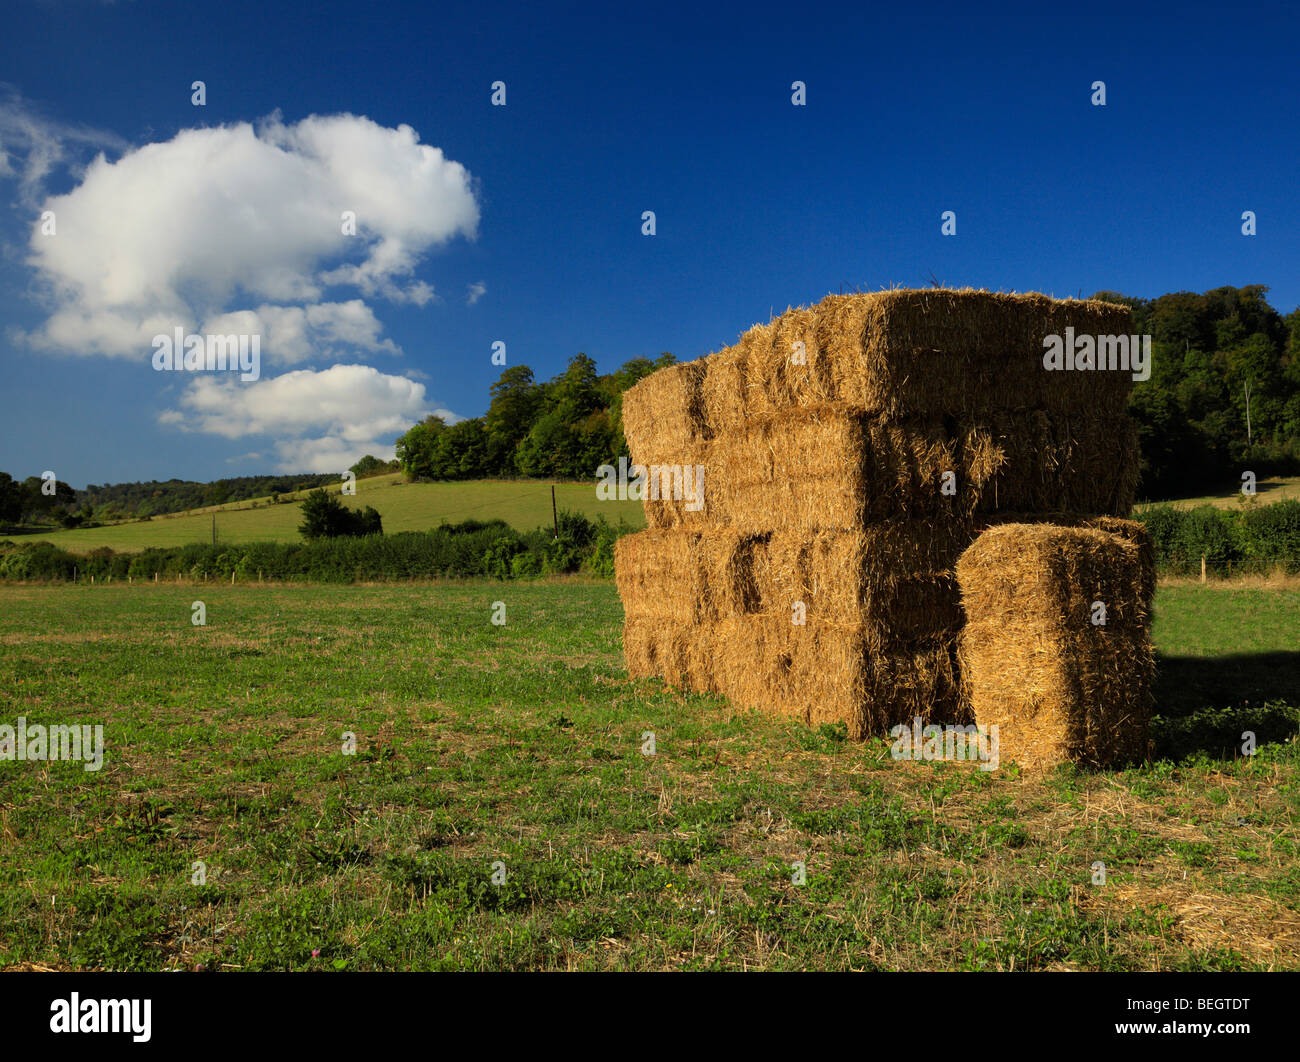 Stack of straw bales. Stock Photo